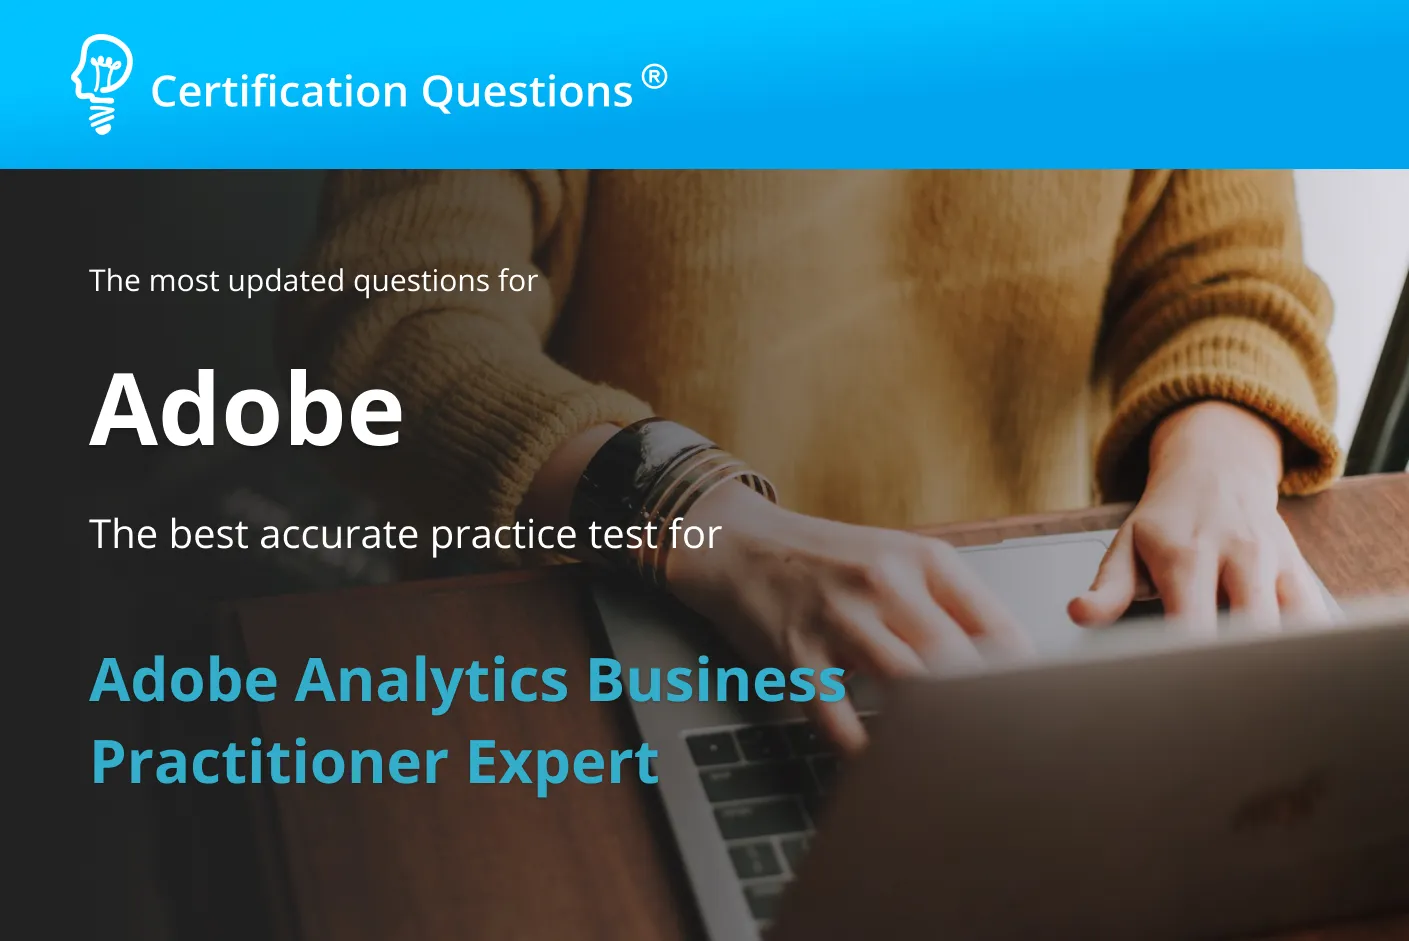 This image is related to Adobe Analytics Business Practitioner exam questions